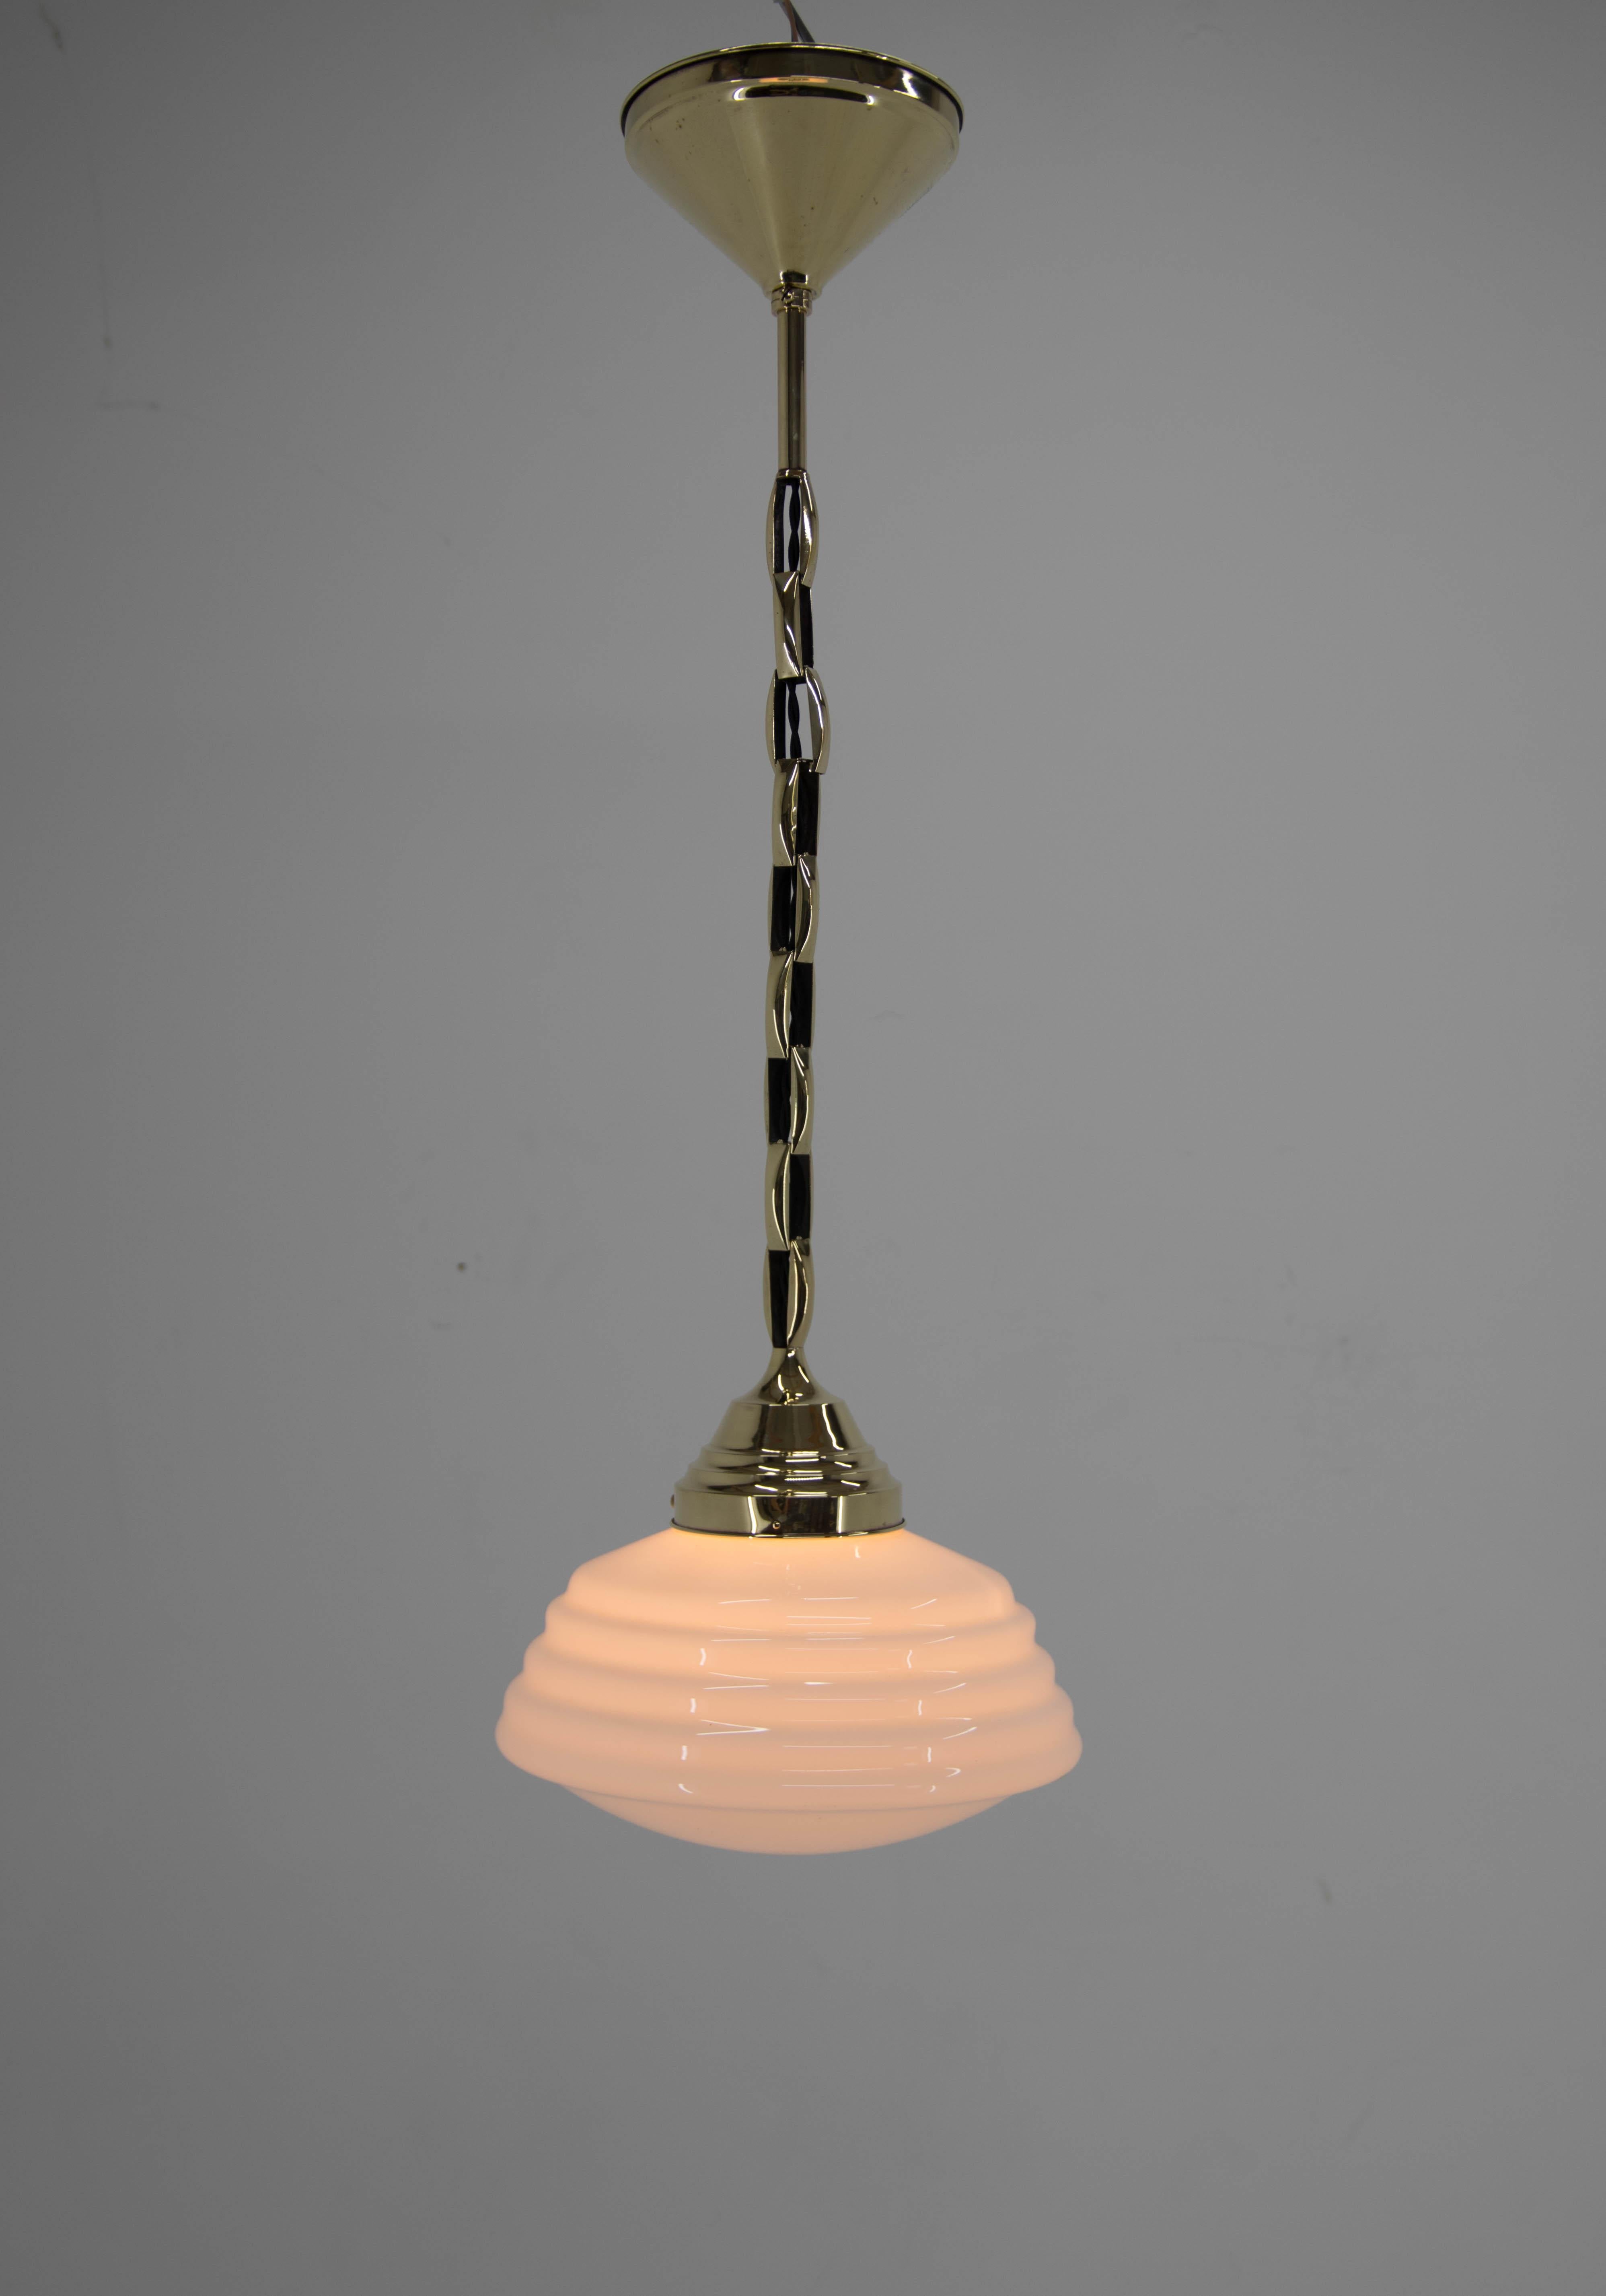 1920s Art Nouveau pendant made of brass and glass.
Restored: brass refinished, glass in a perfect condition.
Rewired: 1x60W, E25-E27 bulb
US wiring compatible.